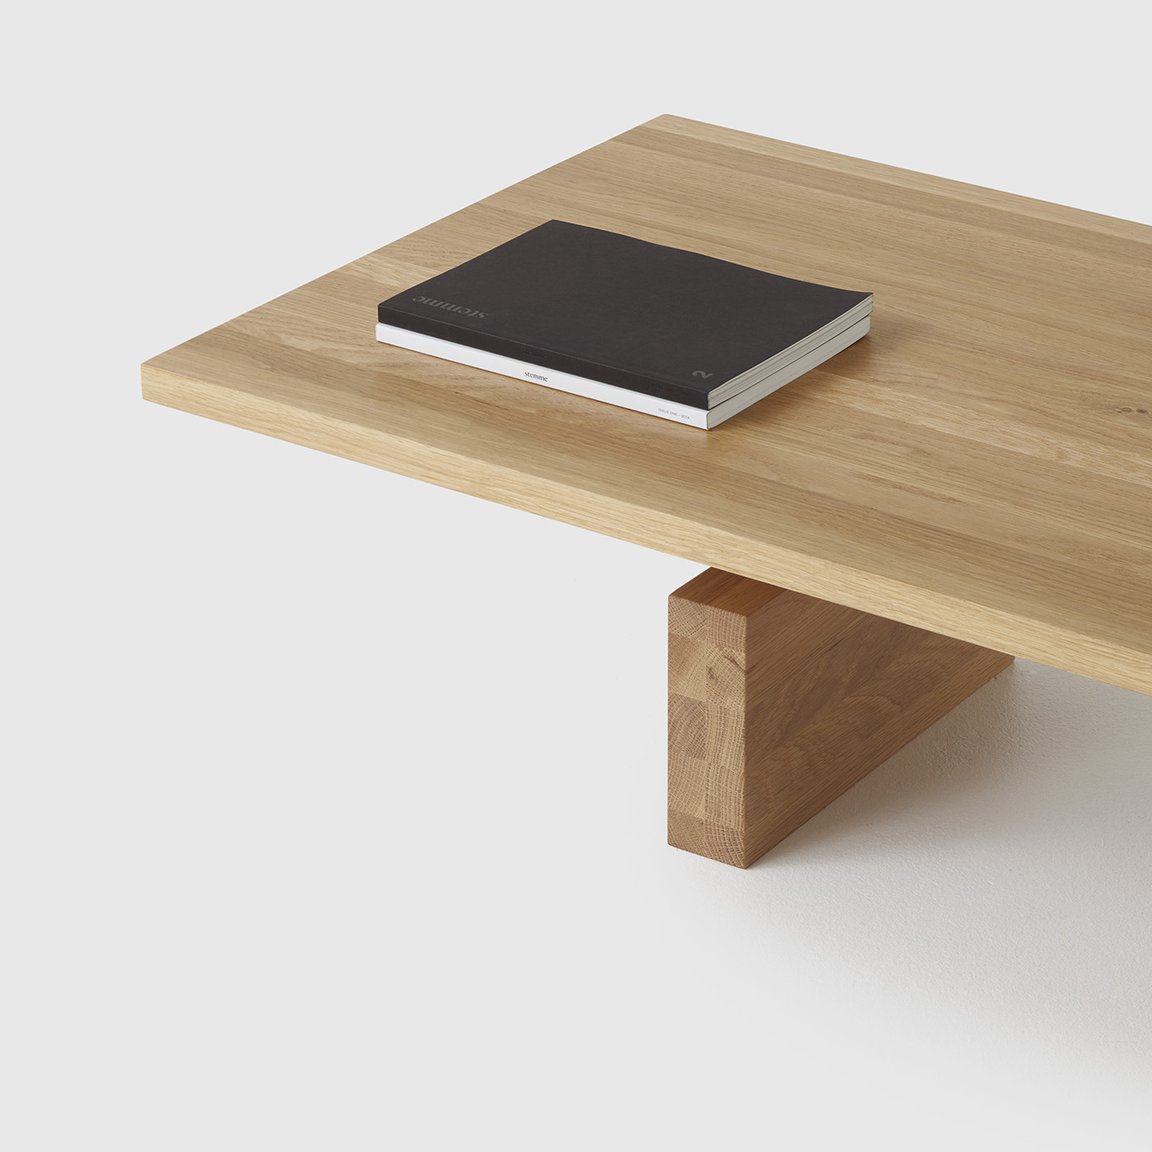 Plane Coffee Table by Resident